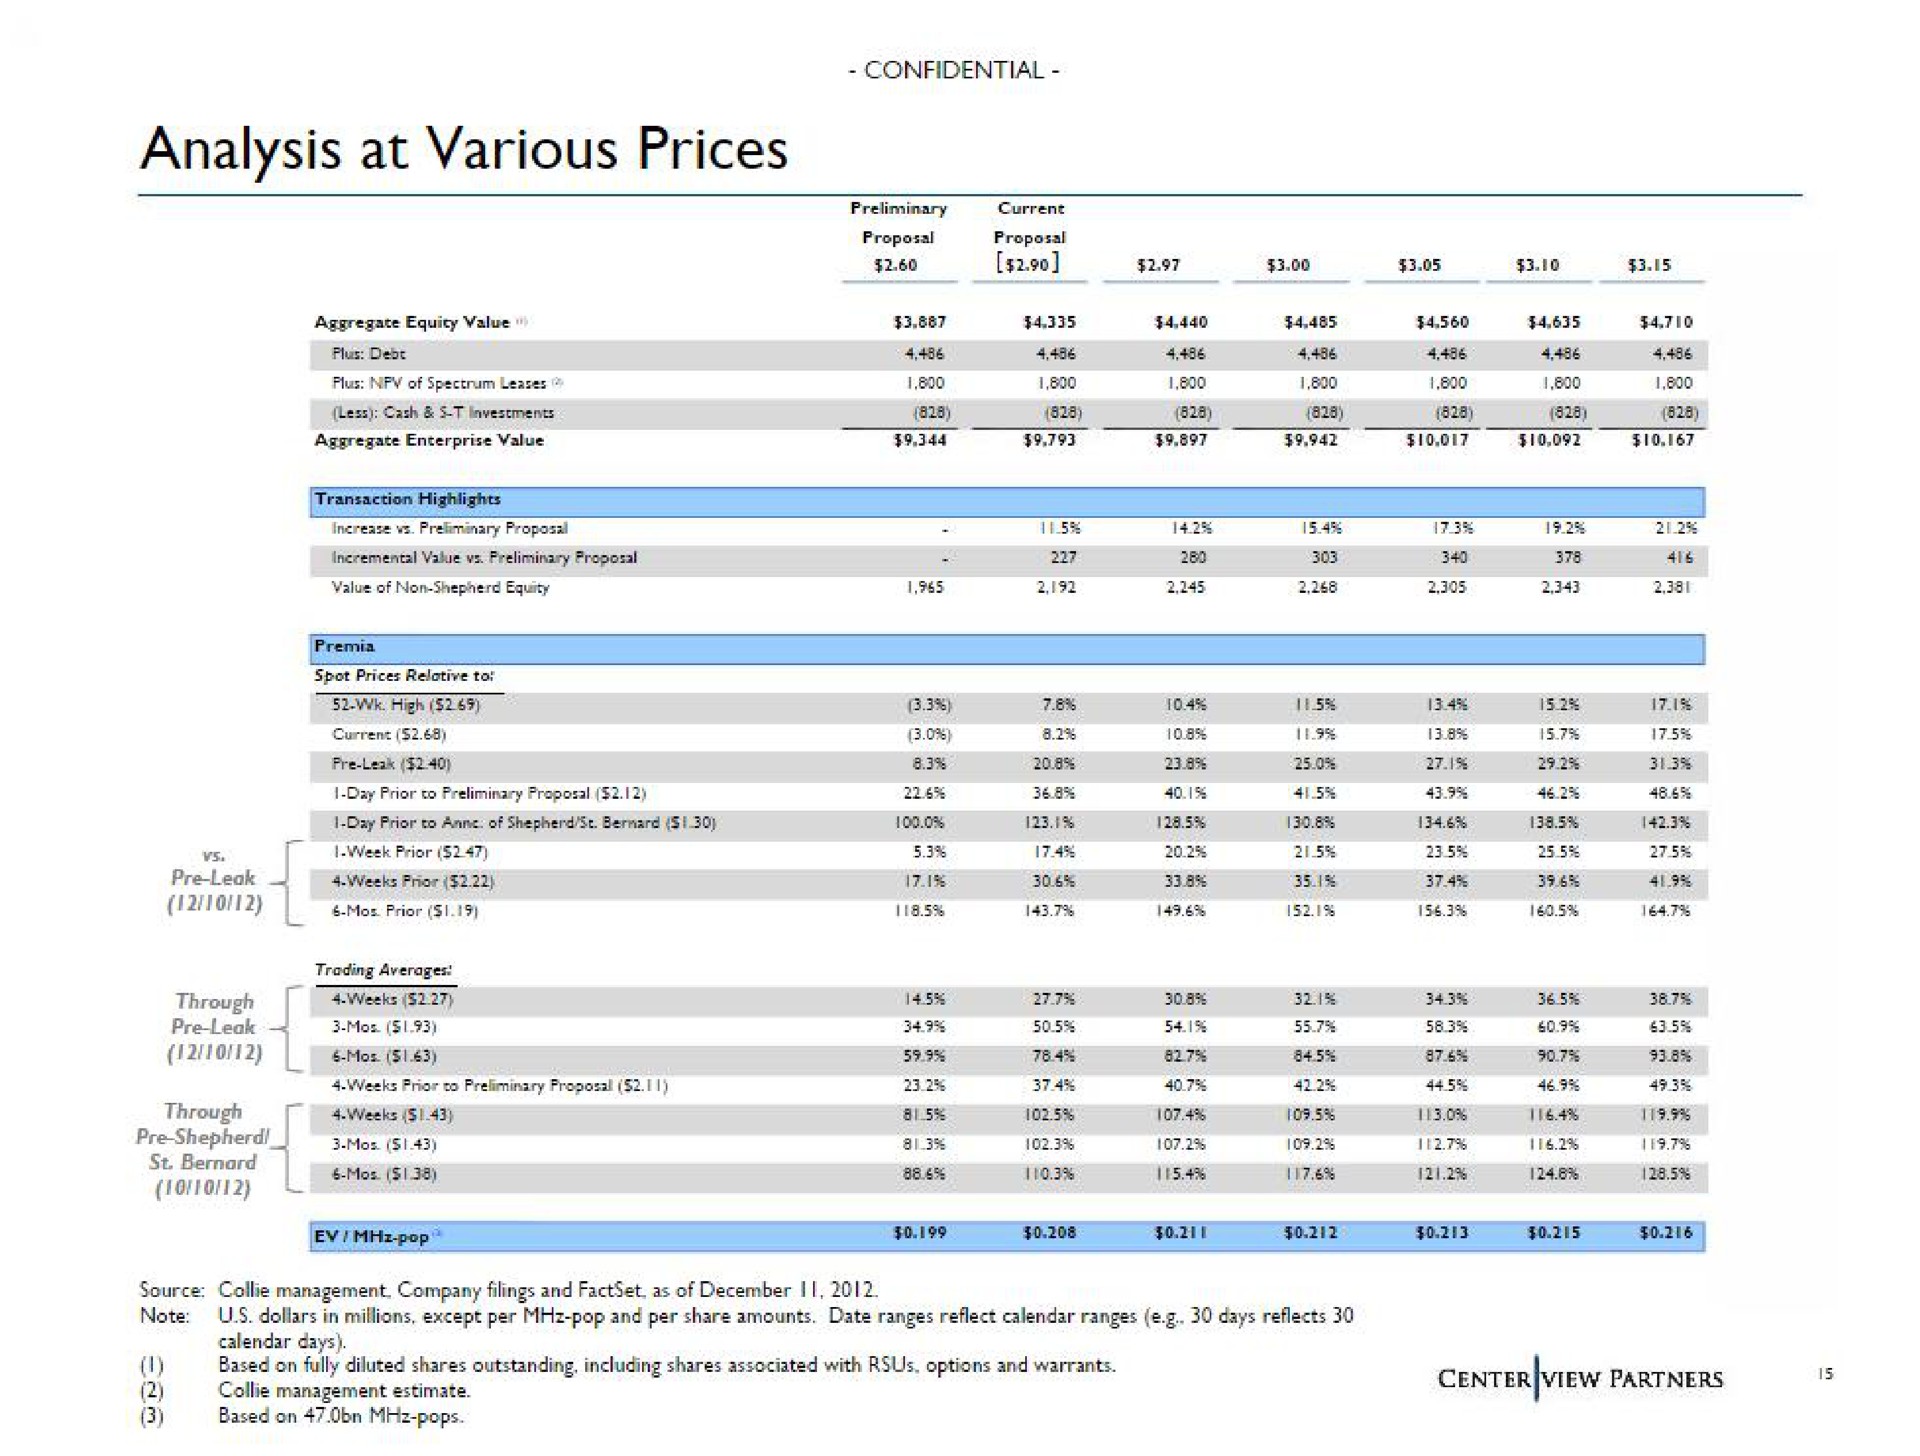 analysis at various prices | Centerview Partners